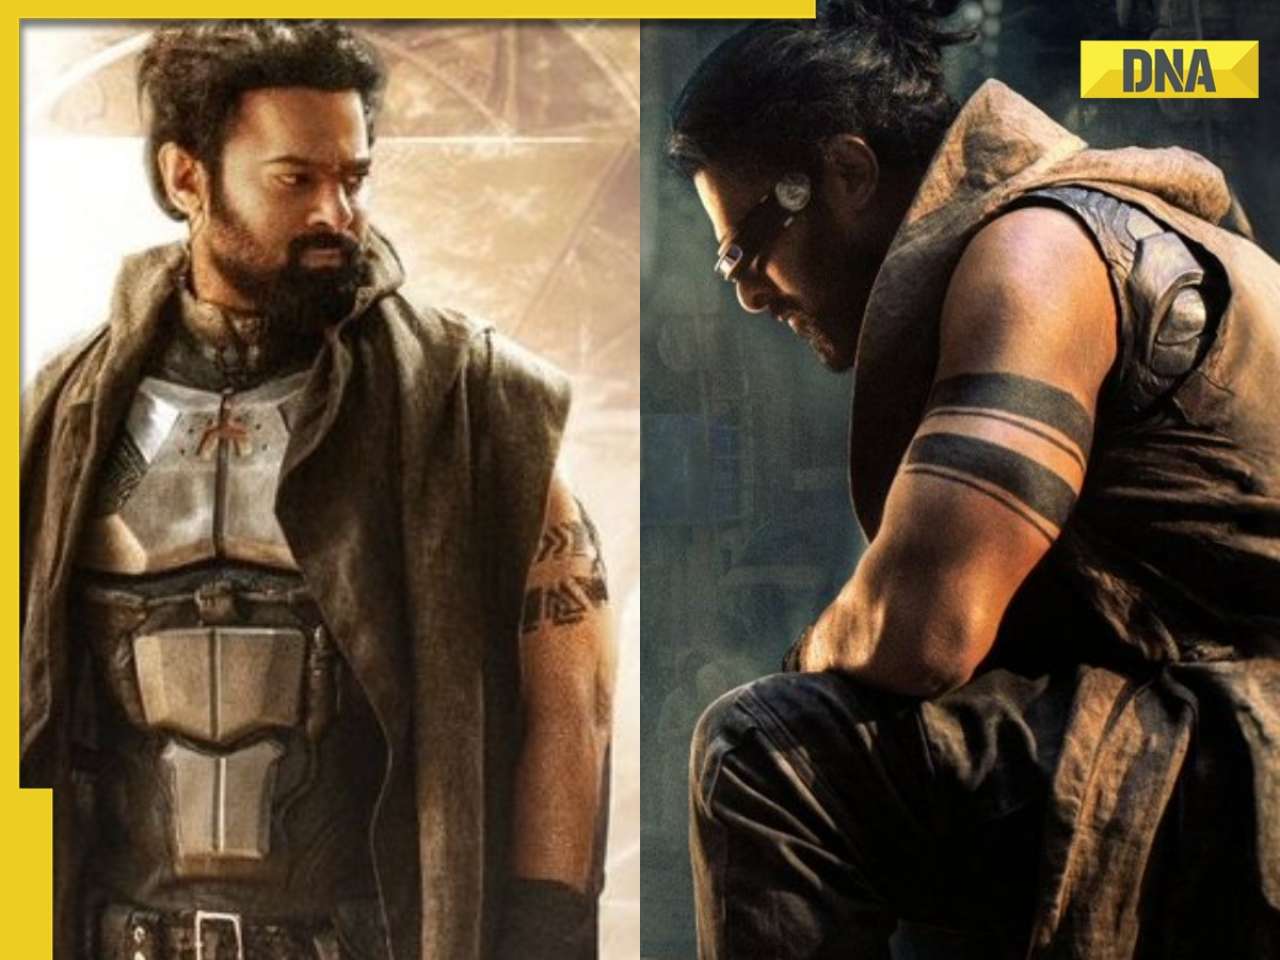 Kalki 2898 AD: Different tattoos on Prabhas' arms spark debate on social media, netizens ask 'blunder or double role?'